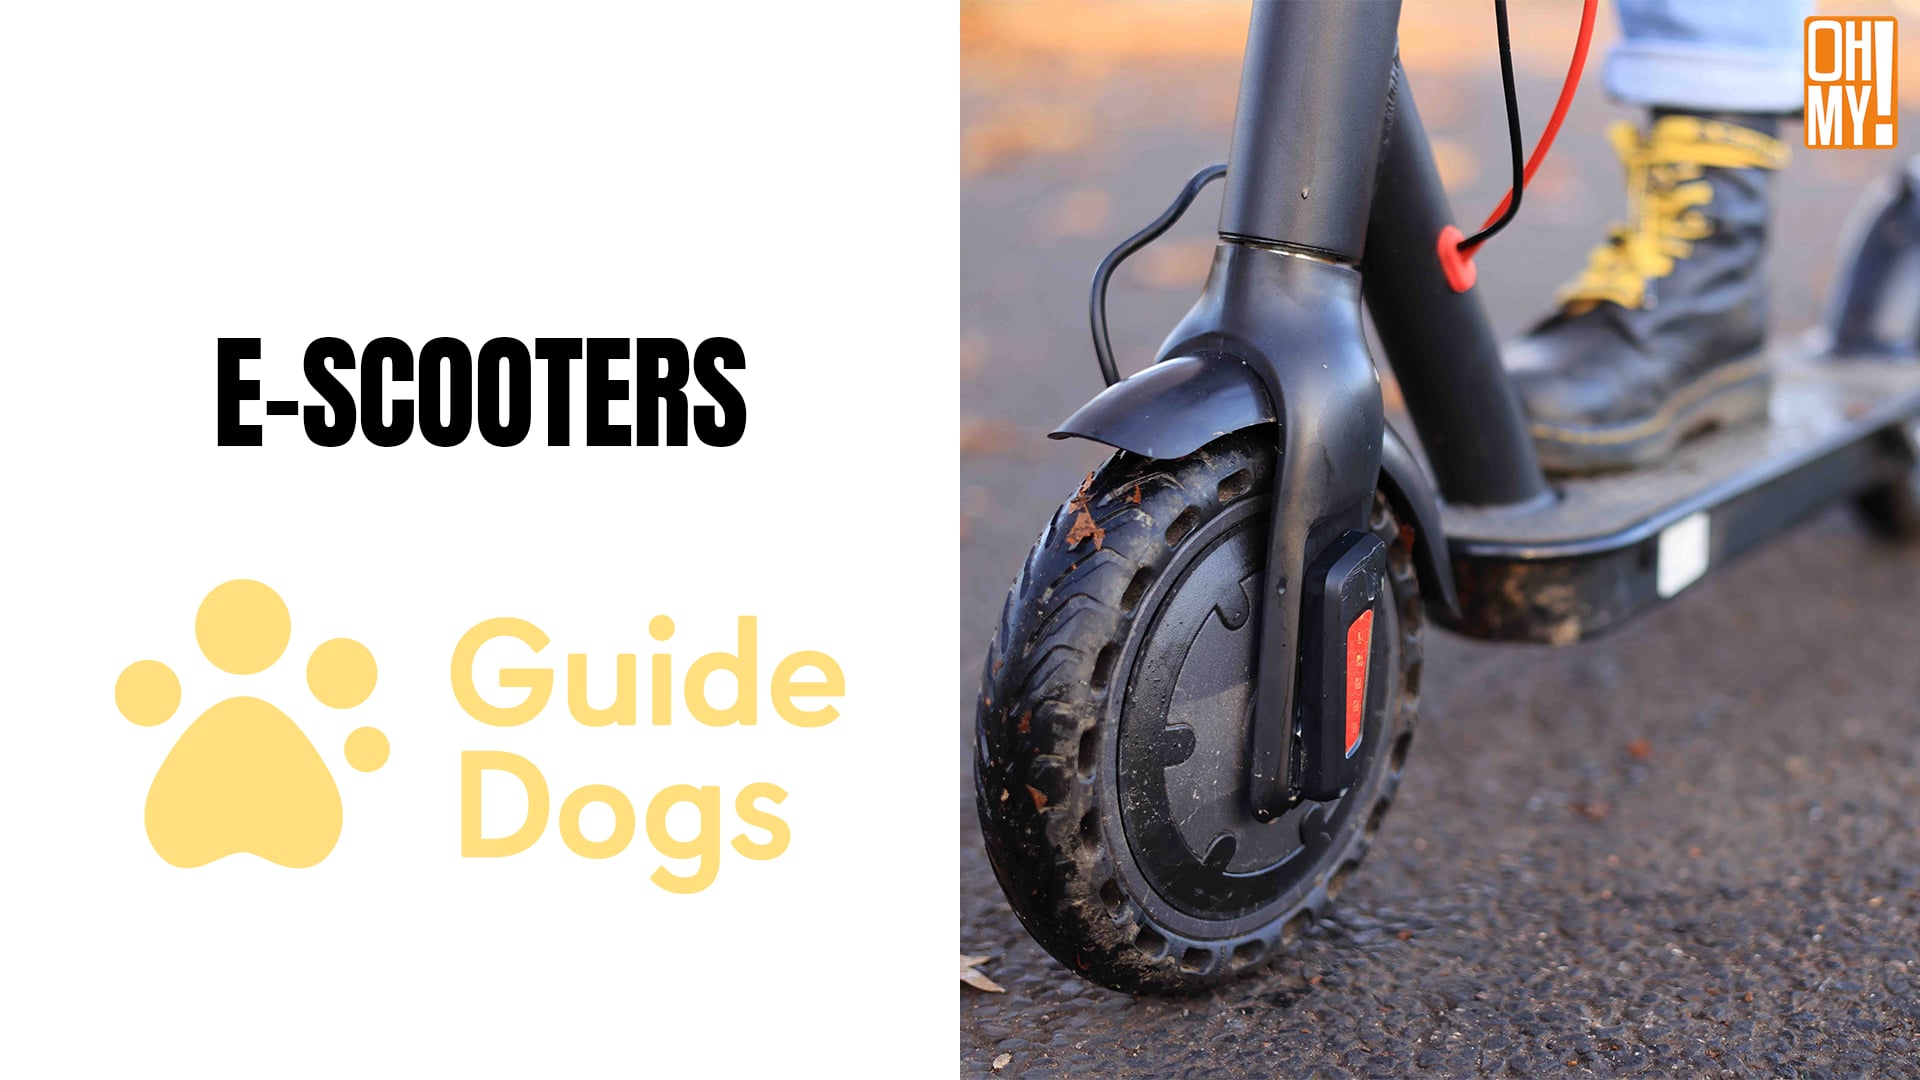 GUIDE DOGS - E-Scooters